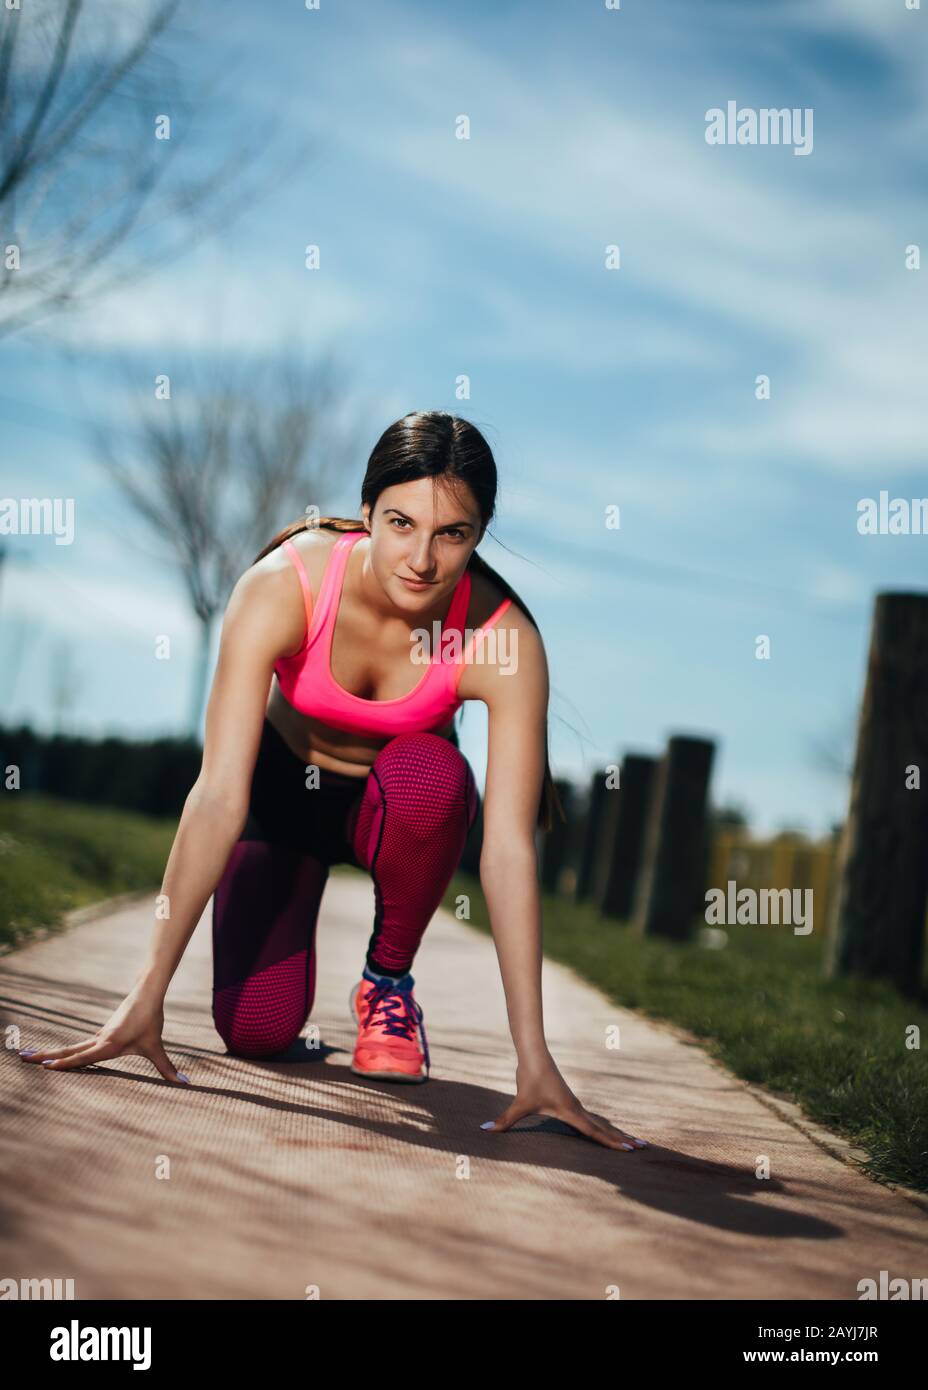 Young athlete woman preparing to start running. Female jogger in start position on the track in park. Healthy recreation concept. Stock Photo